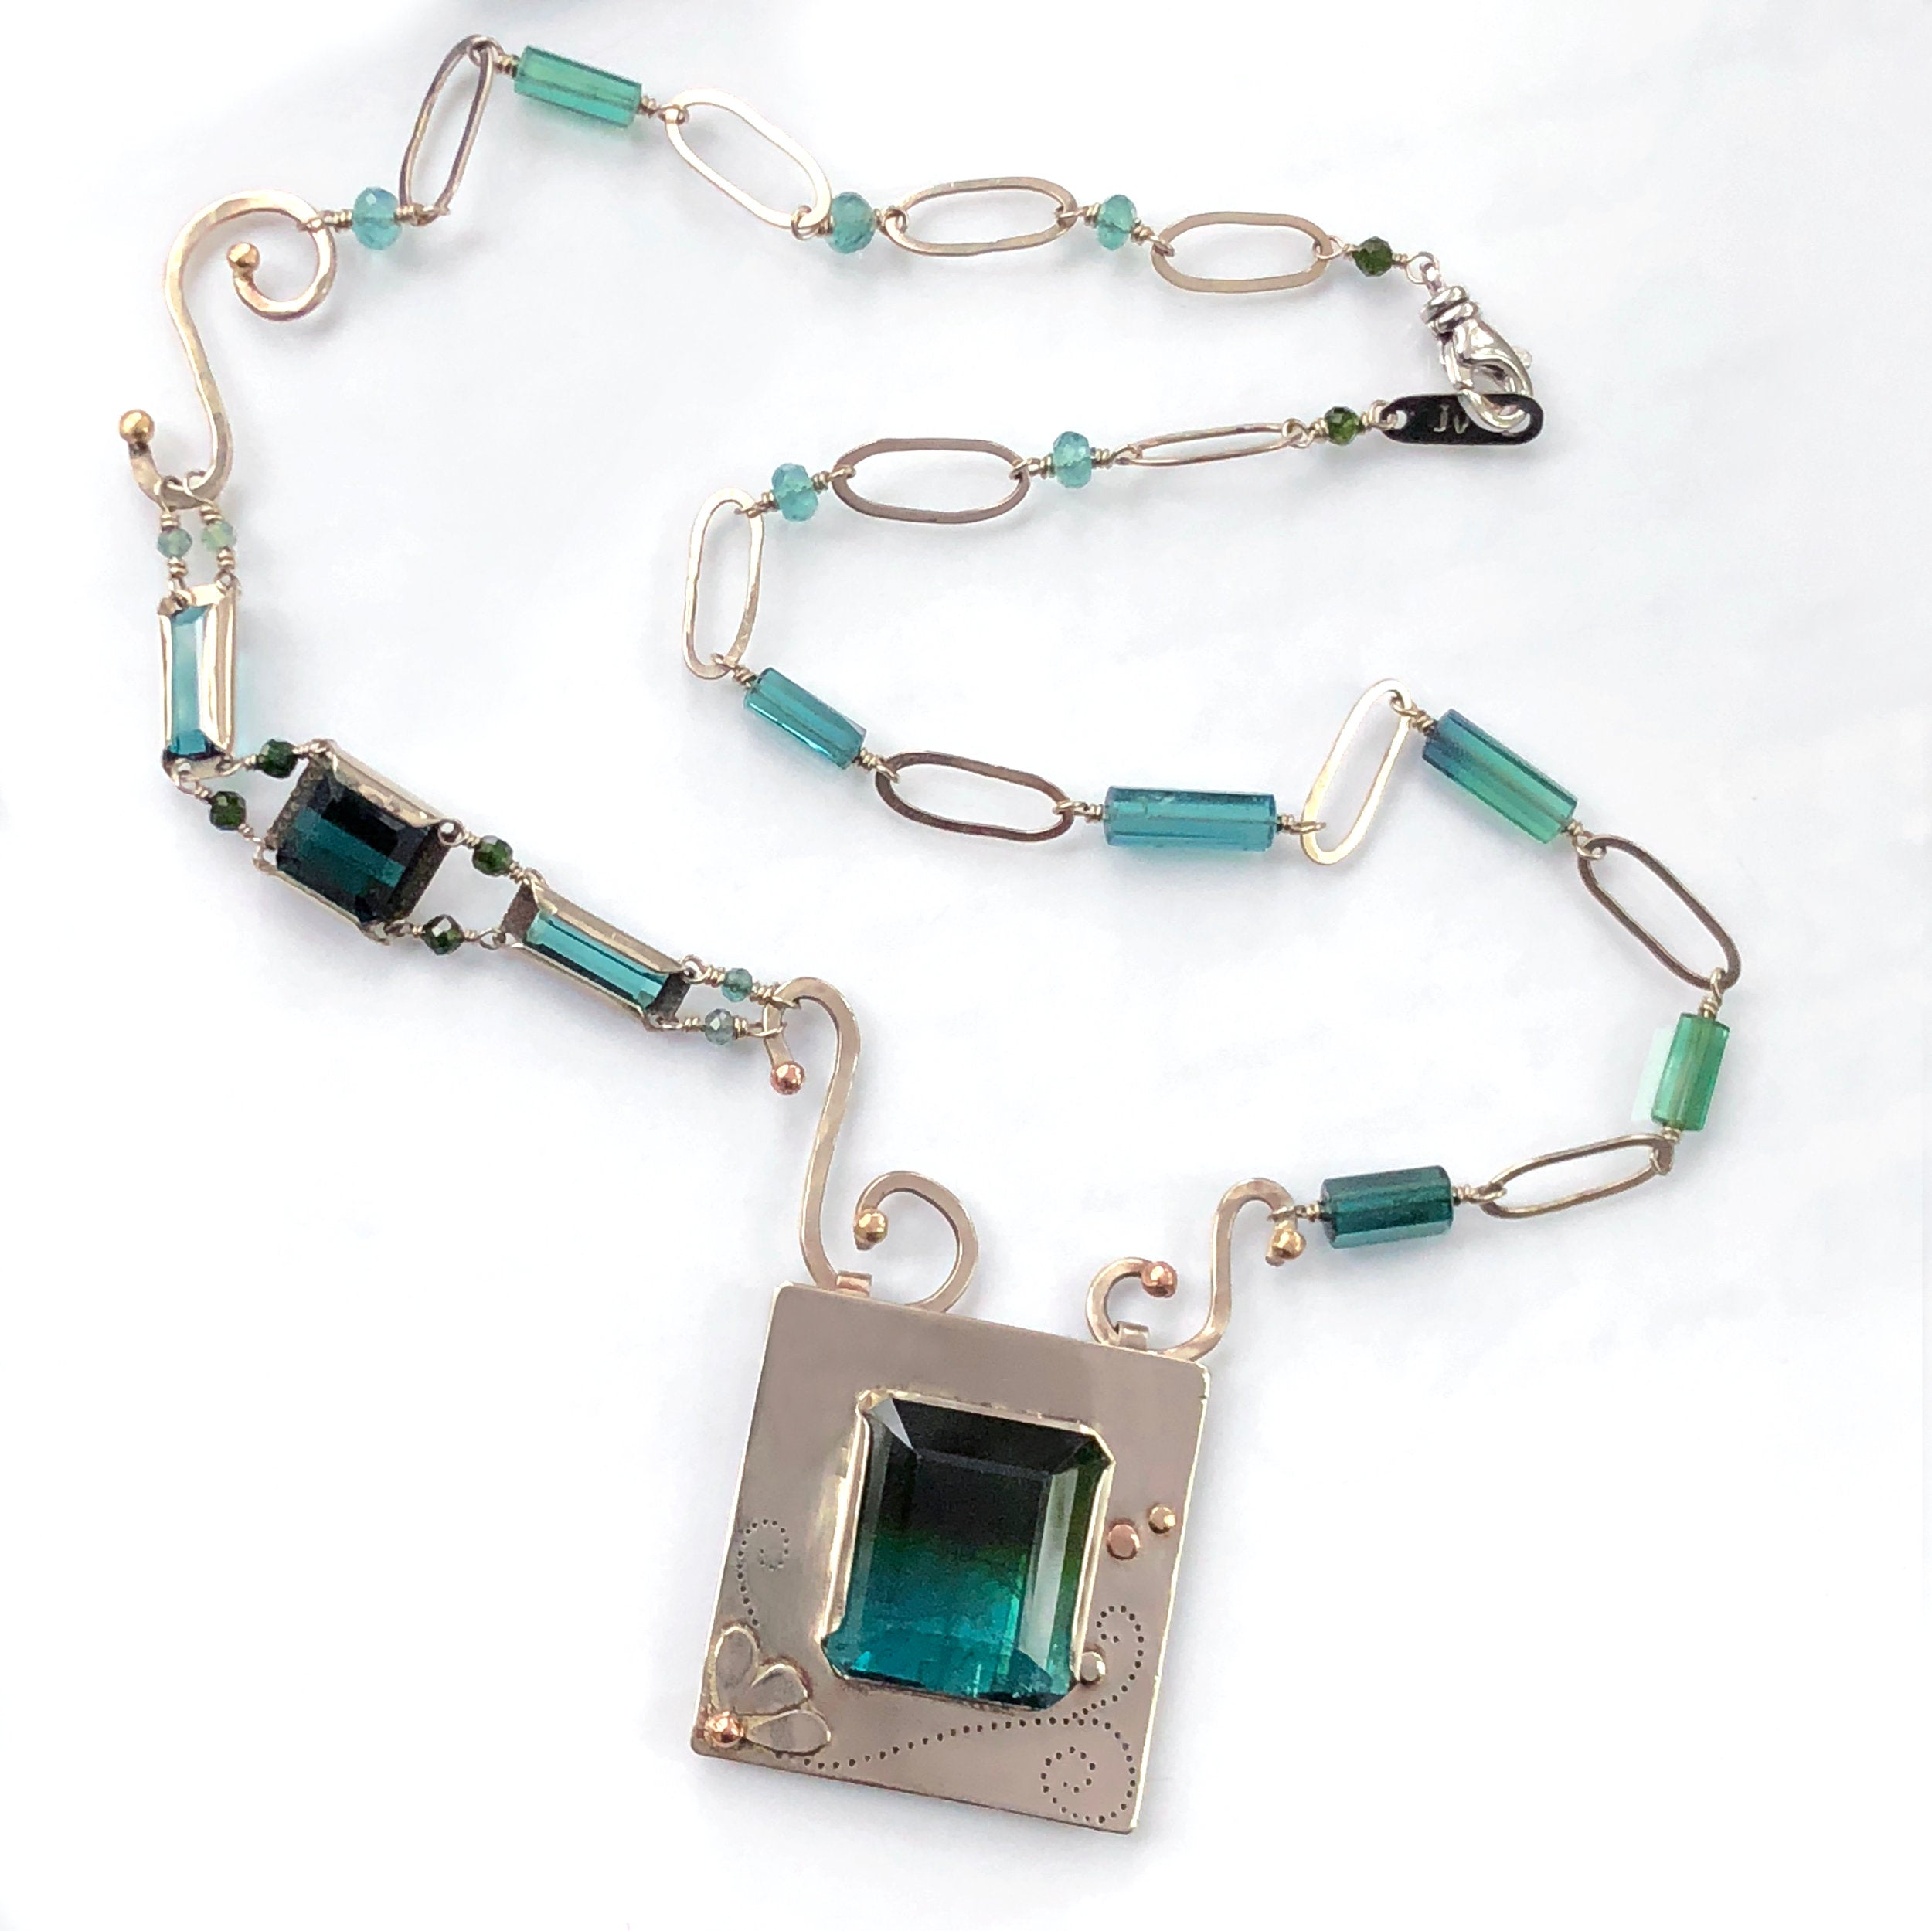 14K Bicolor Tourmaline Necklace, White Gold, One of a Kind Jewelry